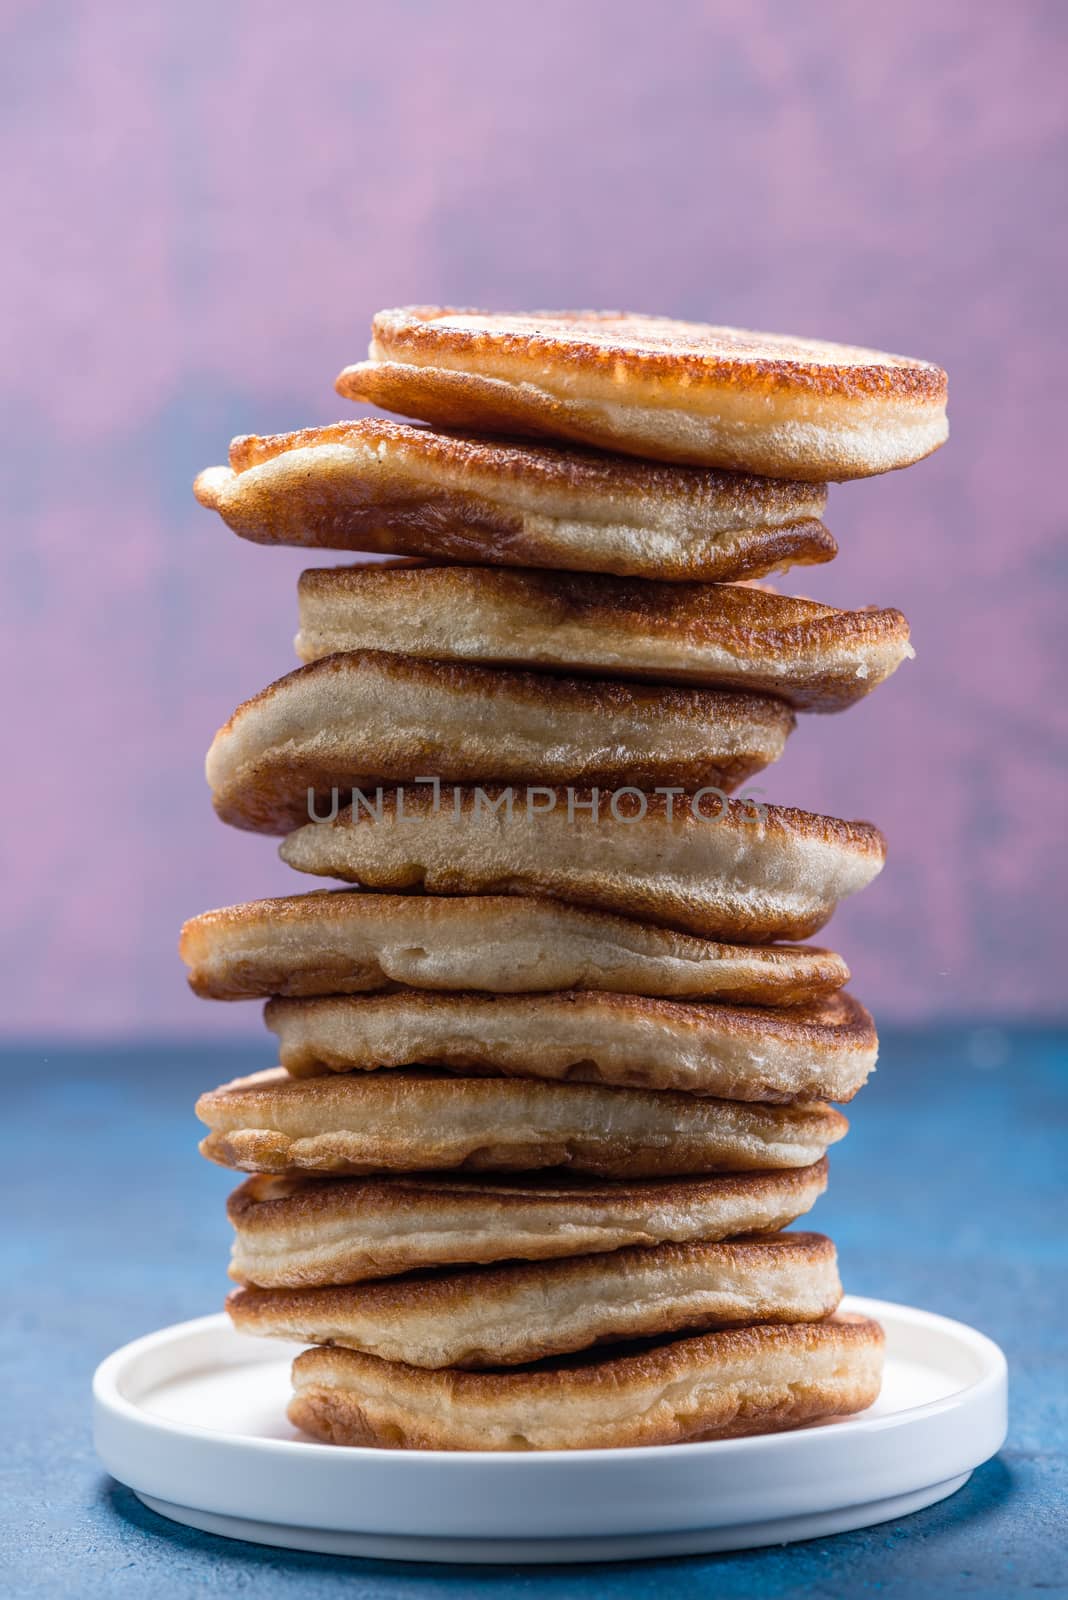 Stack Pile of Pancakes. Pancakes Tower. Copy Space by merc67